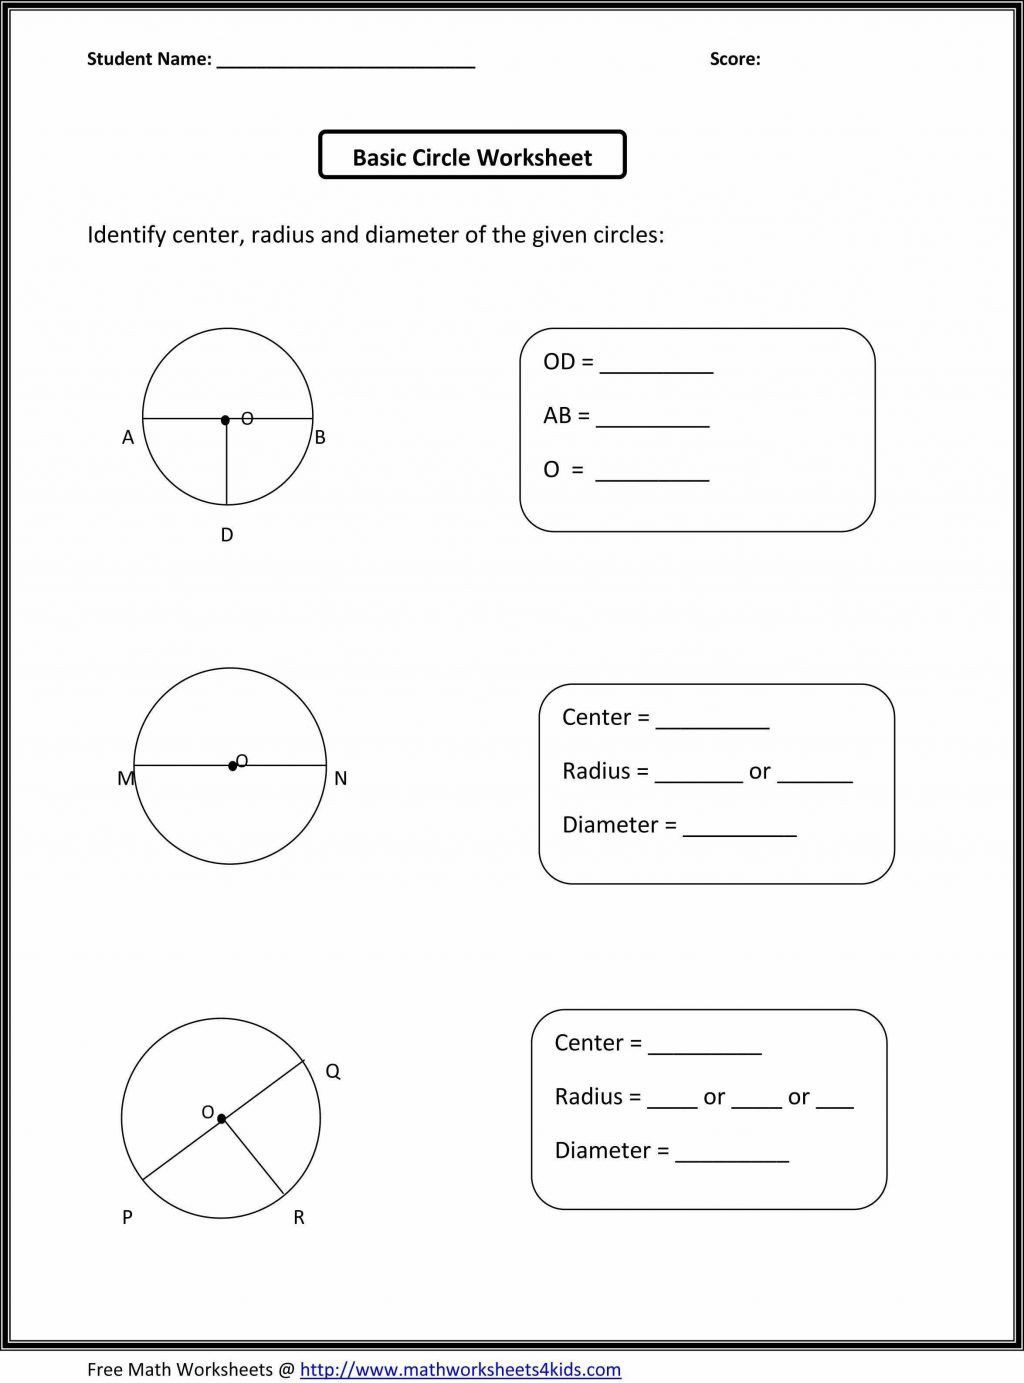 Systems Word Problems Worksheet 4 Writing Equations From Word Problems Worksheet Pdf In 2020